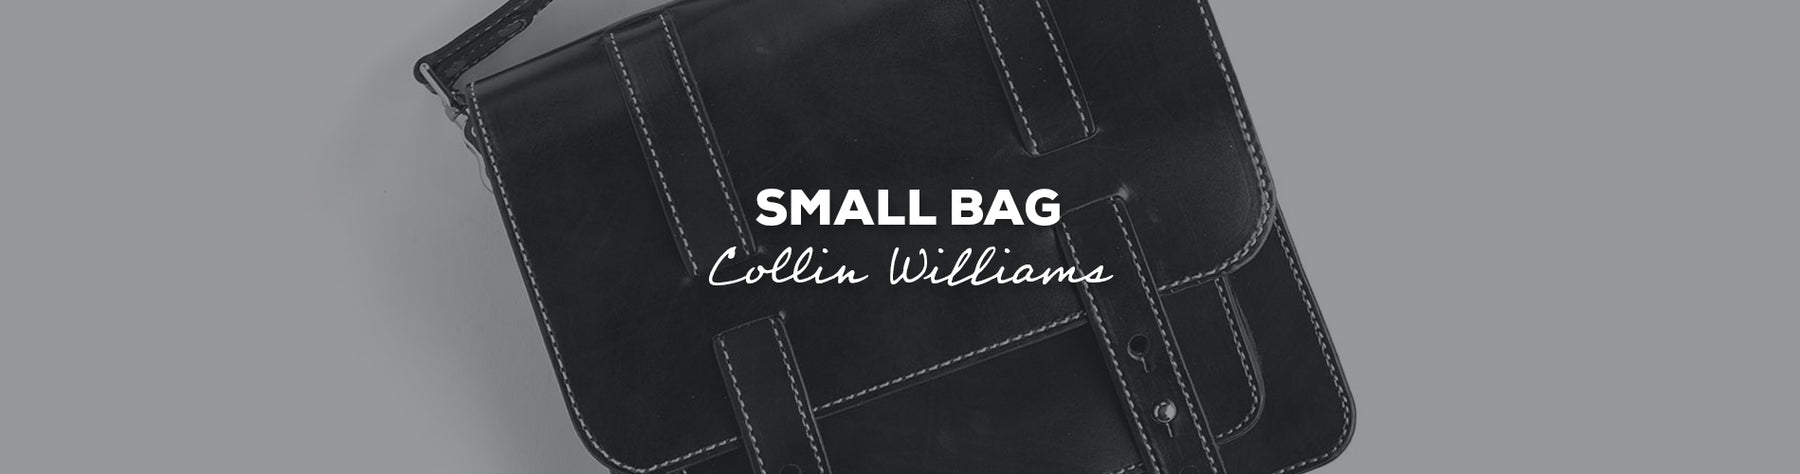 Gift Idea: Small Bag with Collin Williams, Tandy Leather Store Trainer